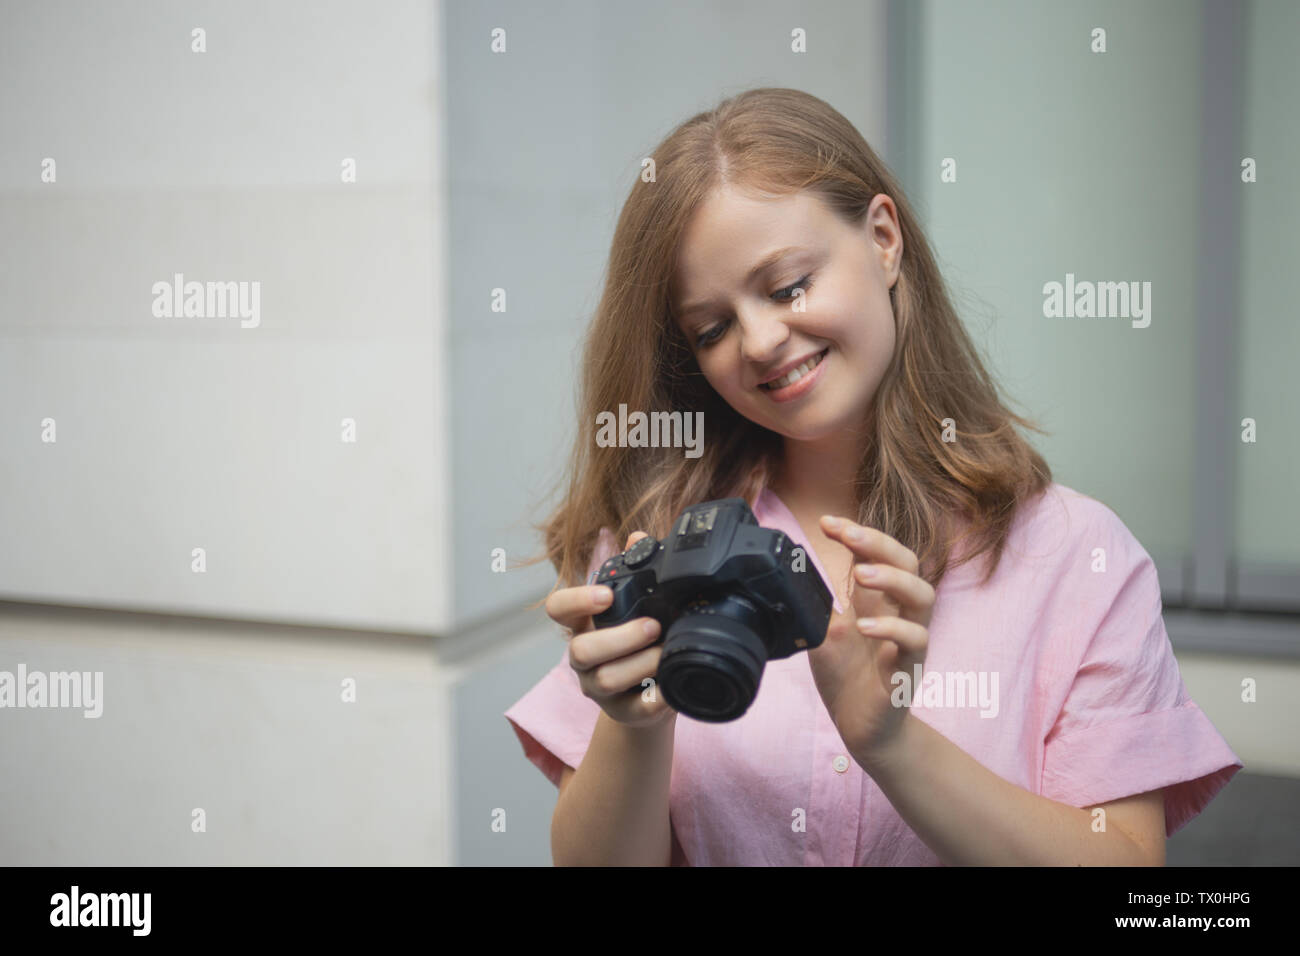 Portrait of young caucasian woman photgrapher holding a digital camera, smiling Stock Photo